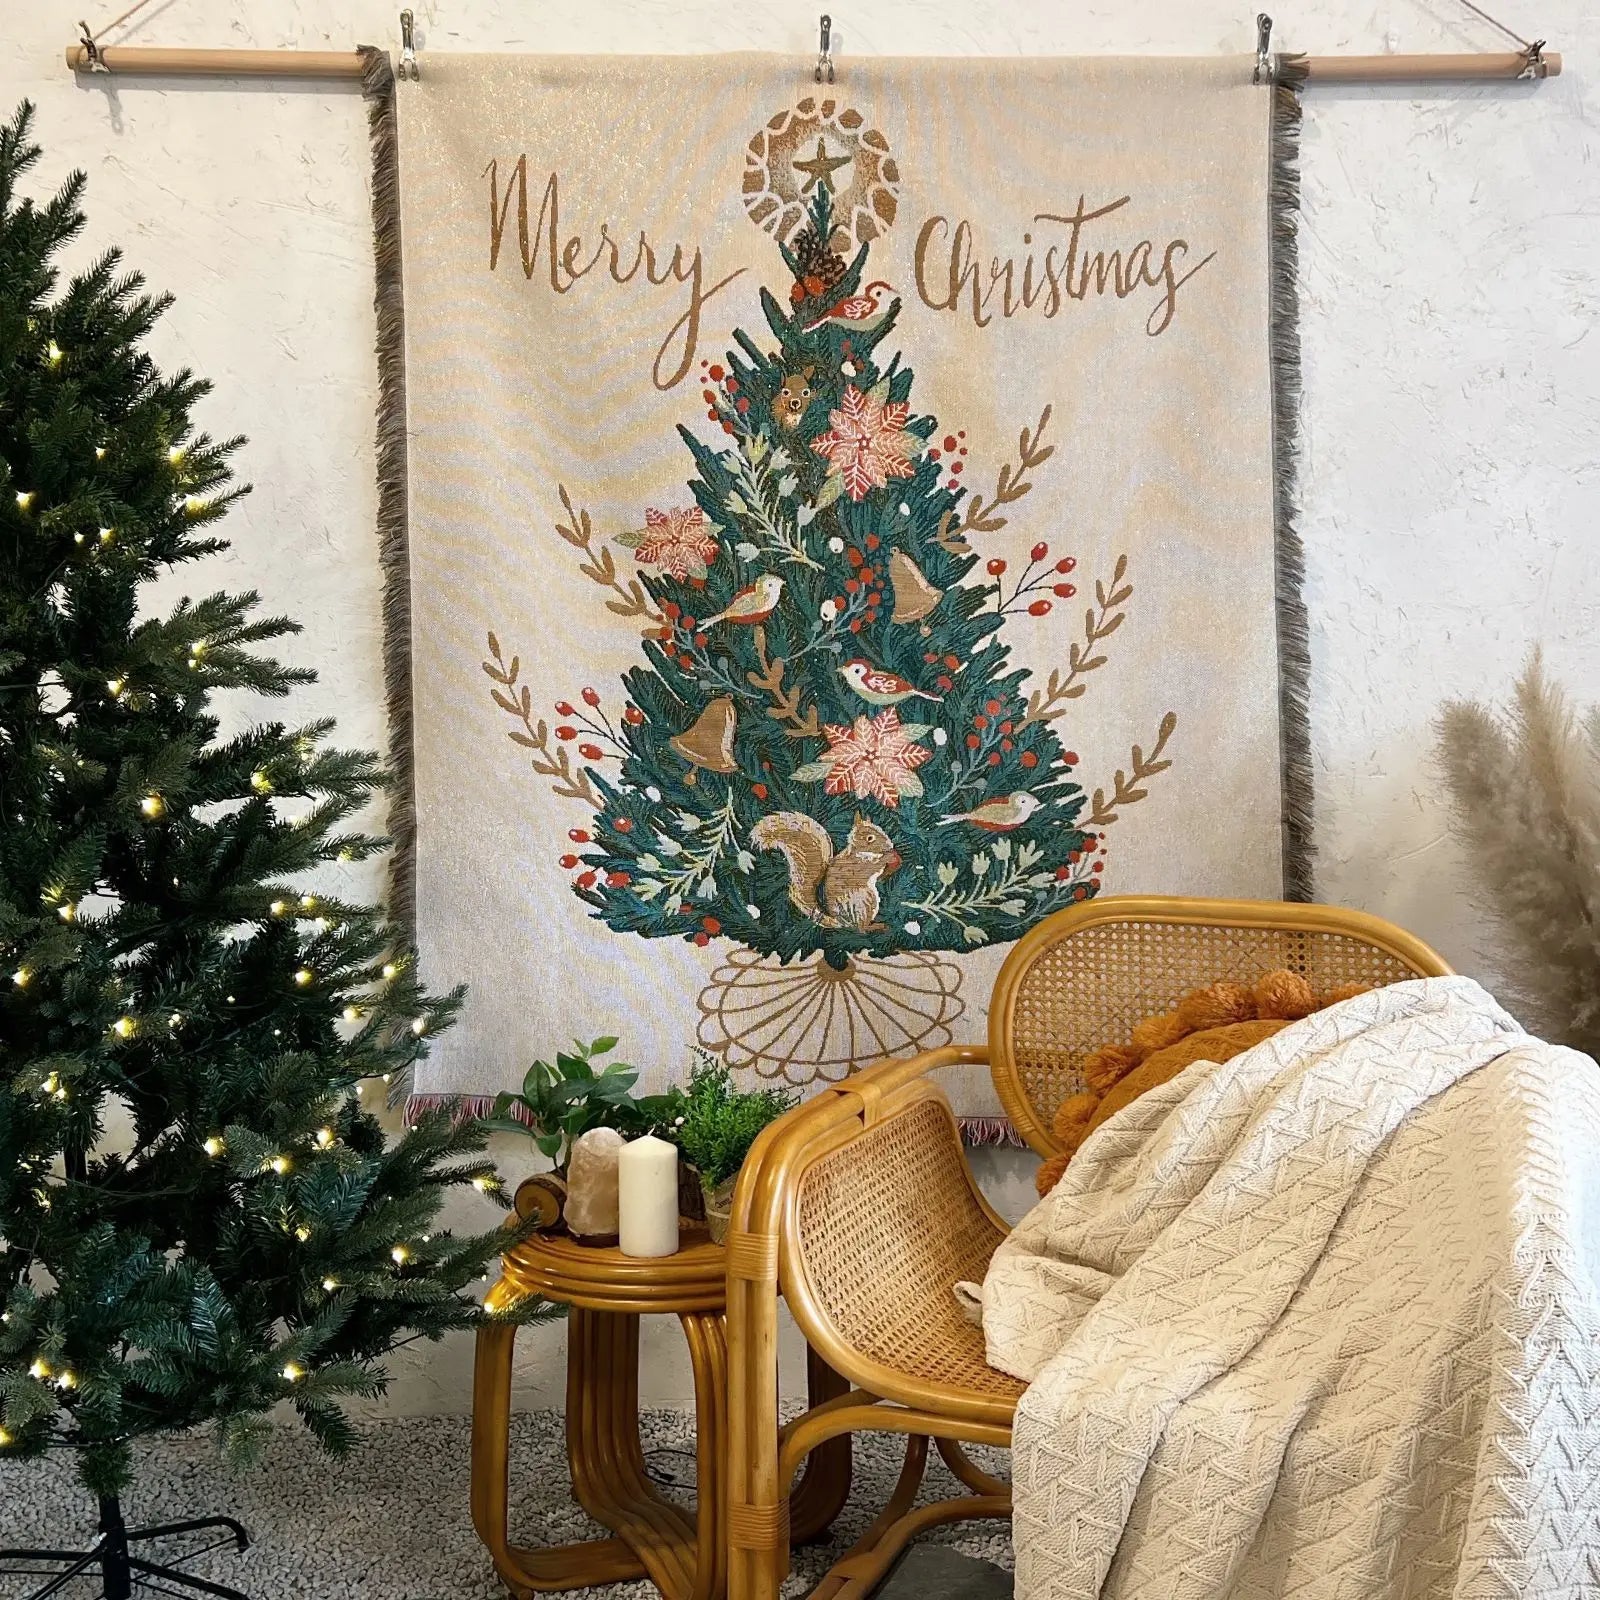 Bohemian Christmas Blanket Early America decorations and use Gift Tapestry Throw Woven from Cotton